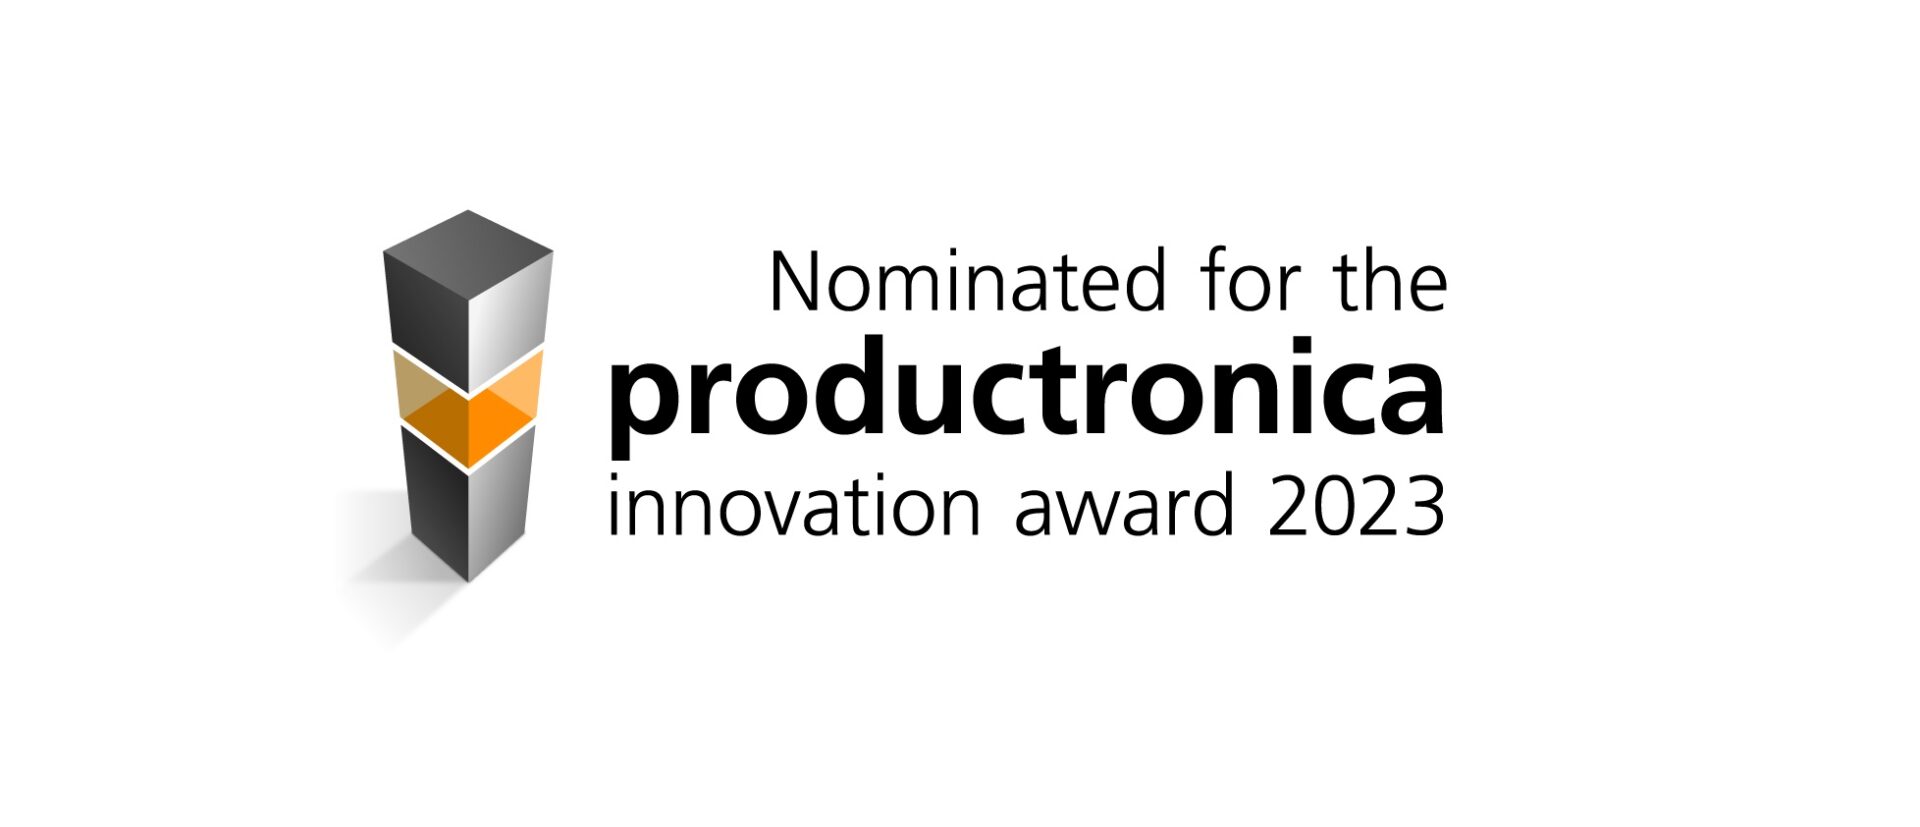 Nominated for the productronica innovation award 2023